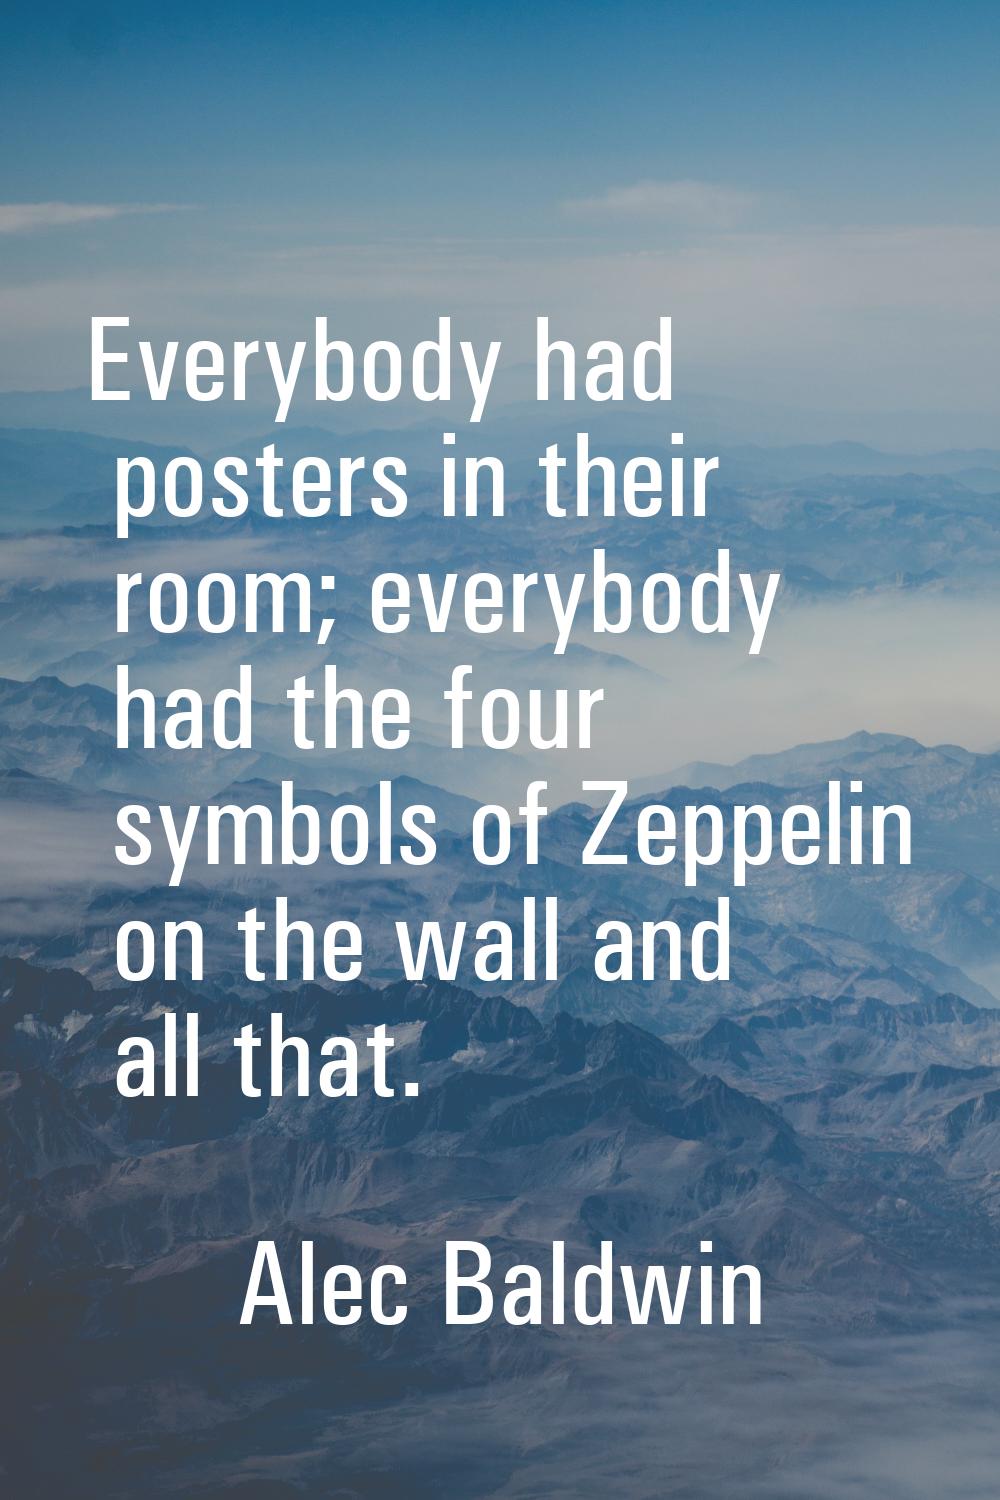 Everybody had posters in their room; everybody had the four symbols of Zeppelin on the wall and all